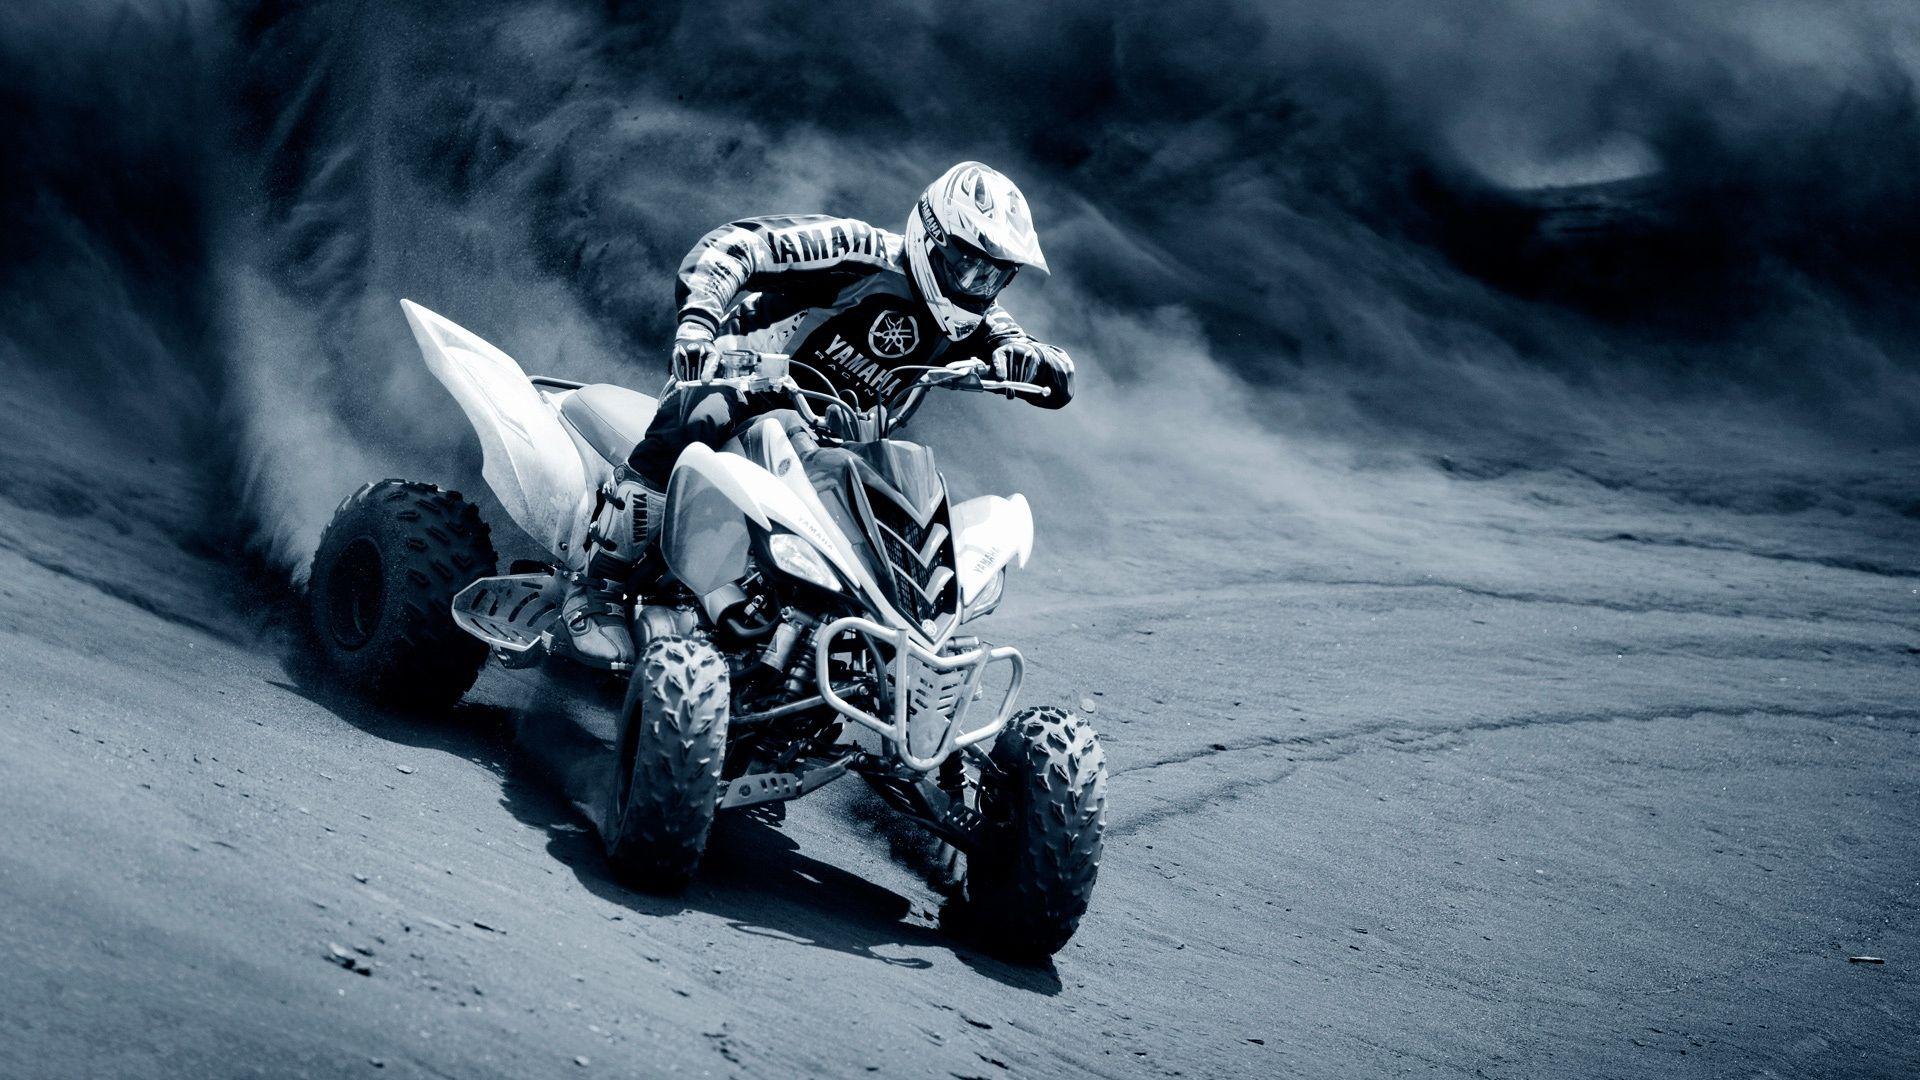 Quad Bike Sport HD wallpaper is 1.37 Mb in size (original file is 1920x1080) and was downloaded 9 times. It was downloade. Yamaha atv, Yamaha sport, Atv motocross